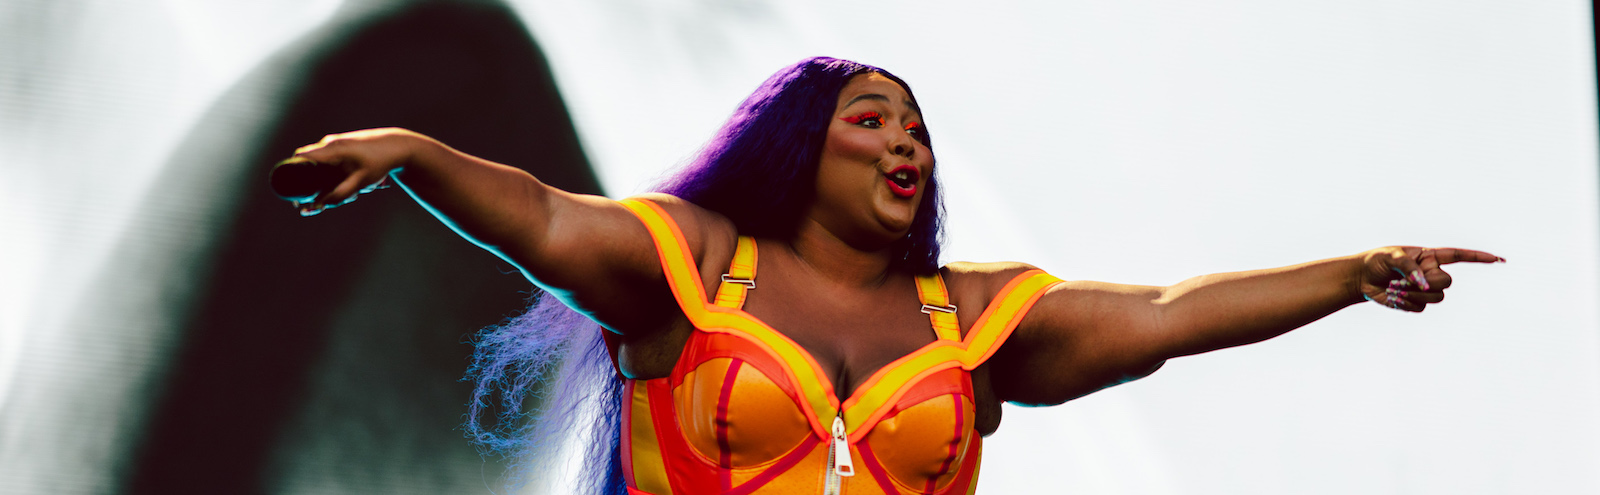 LIZZO-by-Chad-Wadsworth-for-ACL-Fest-2019-DSC04333.jpg